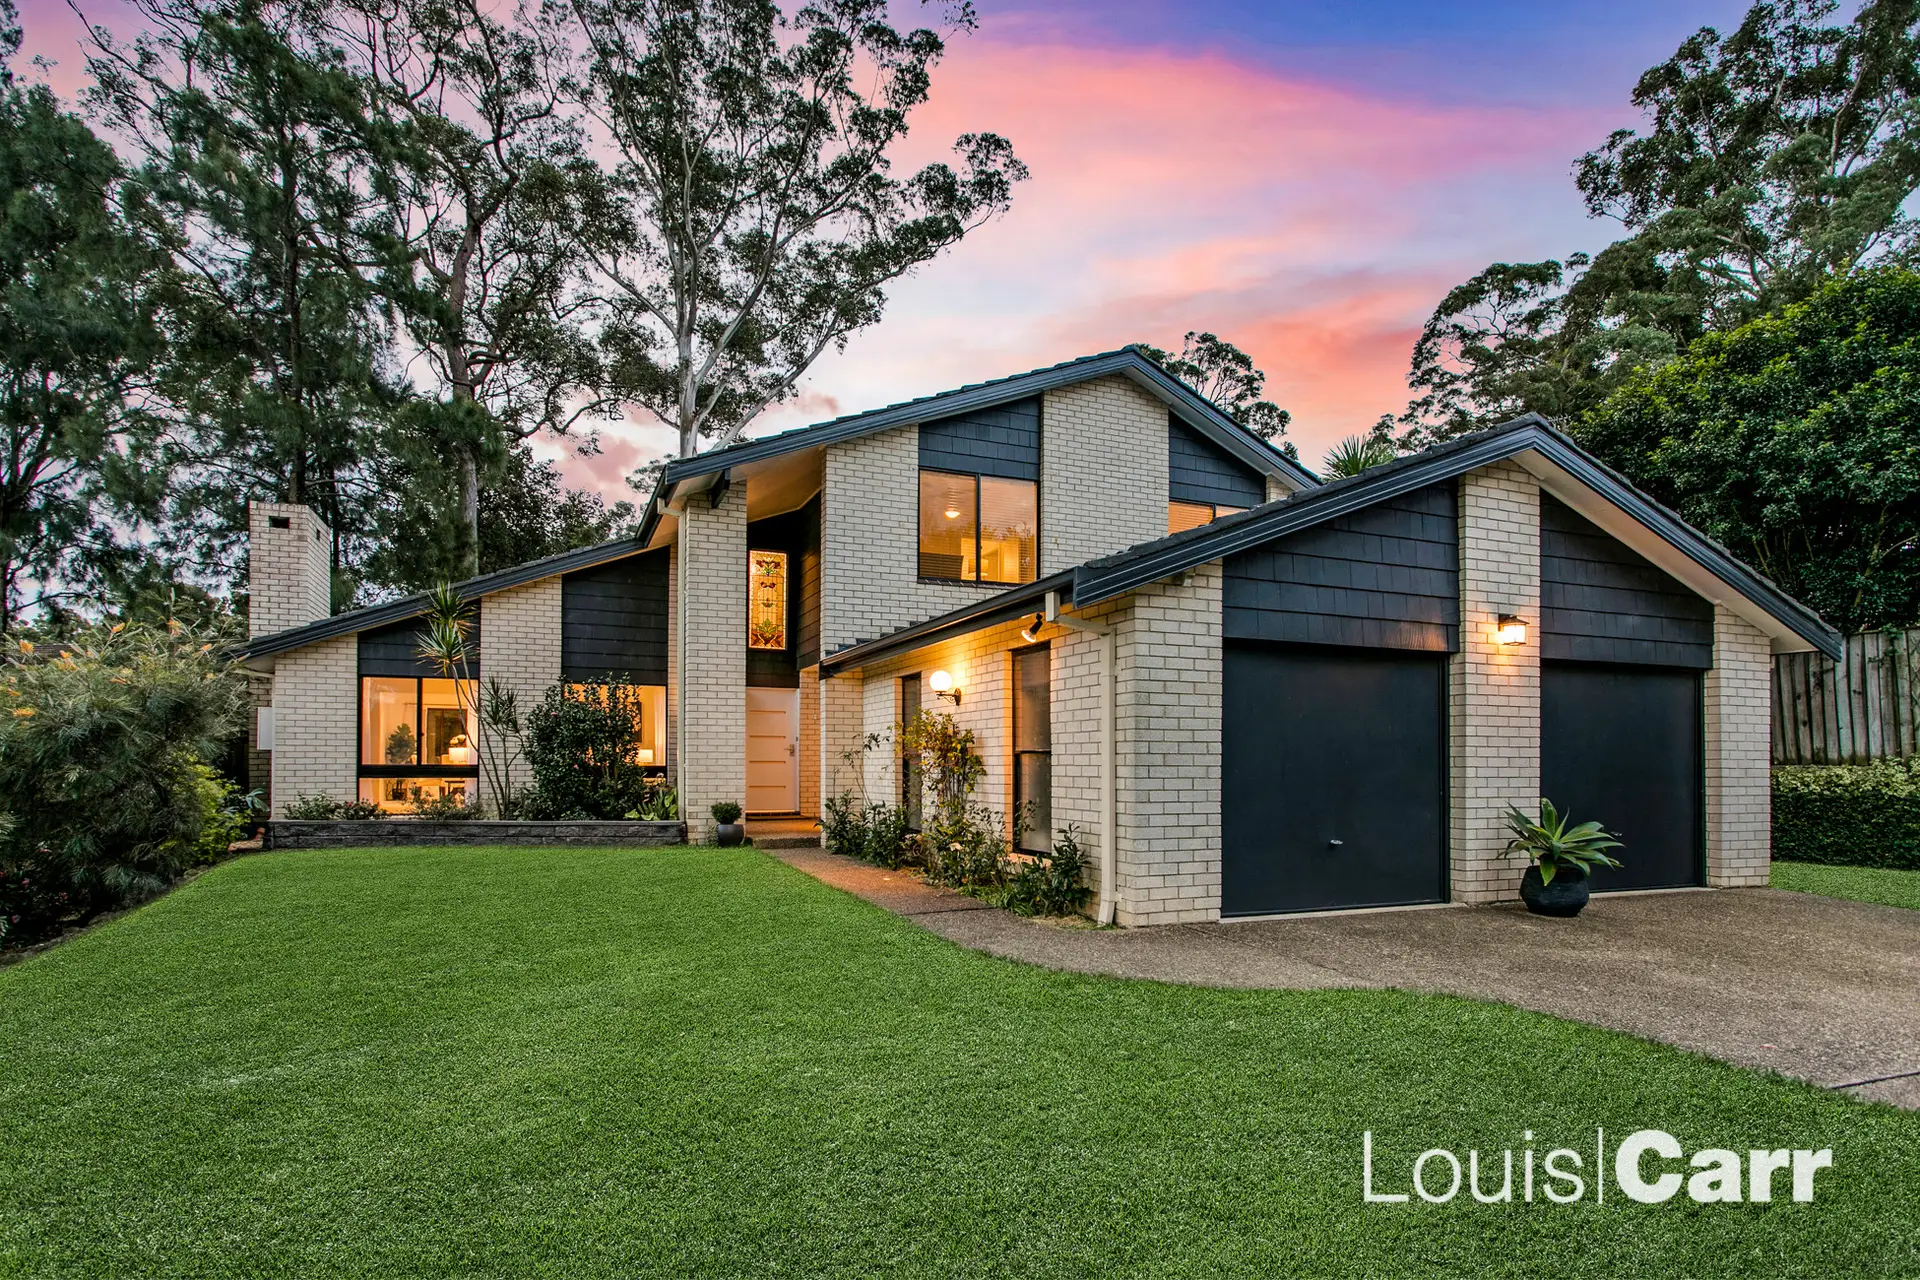 Photo #1: 111 Shepherds Drive, Cherrybrook - Sold by Louis Carr Real Estate